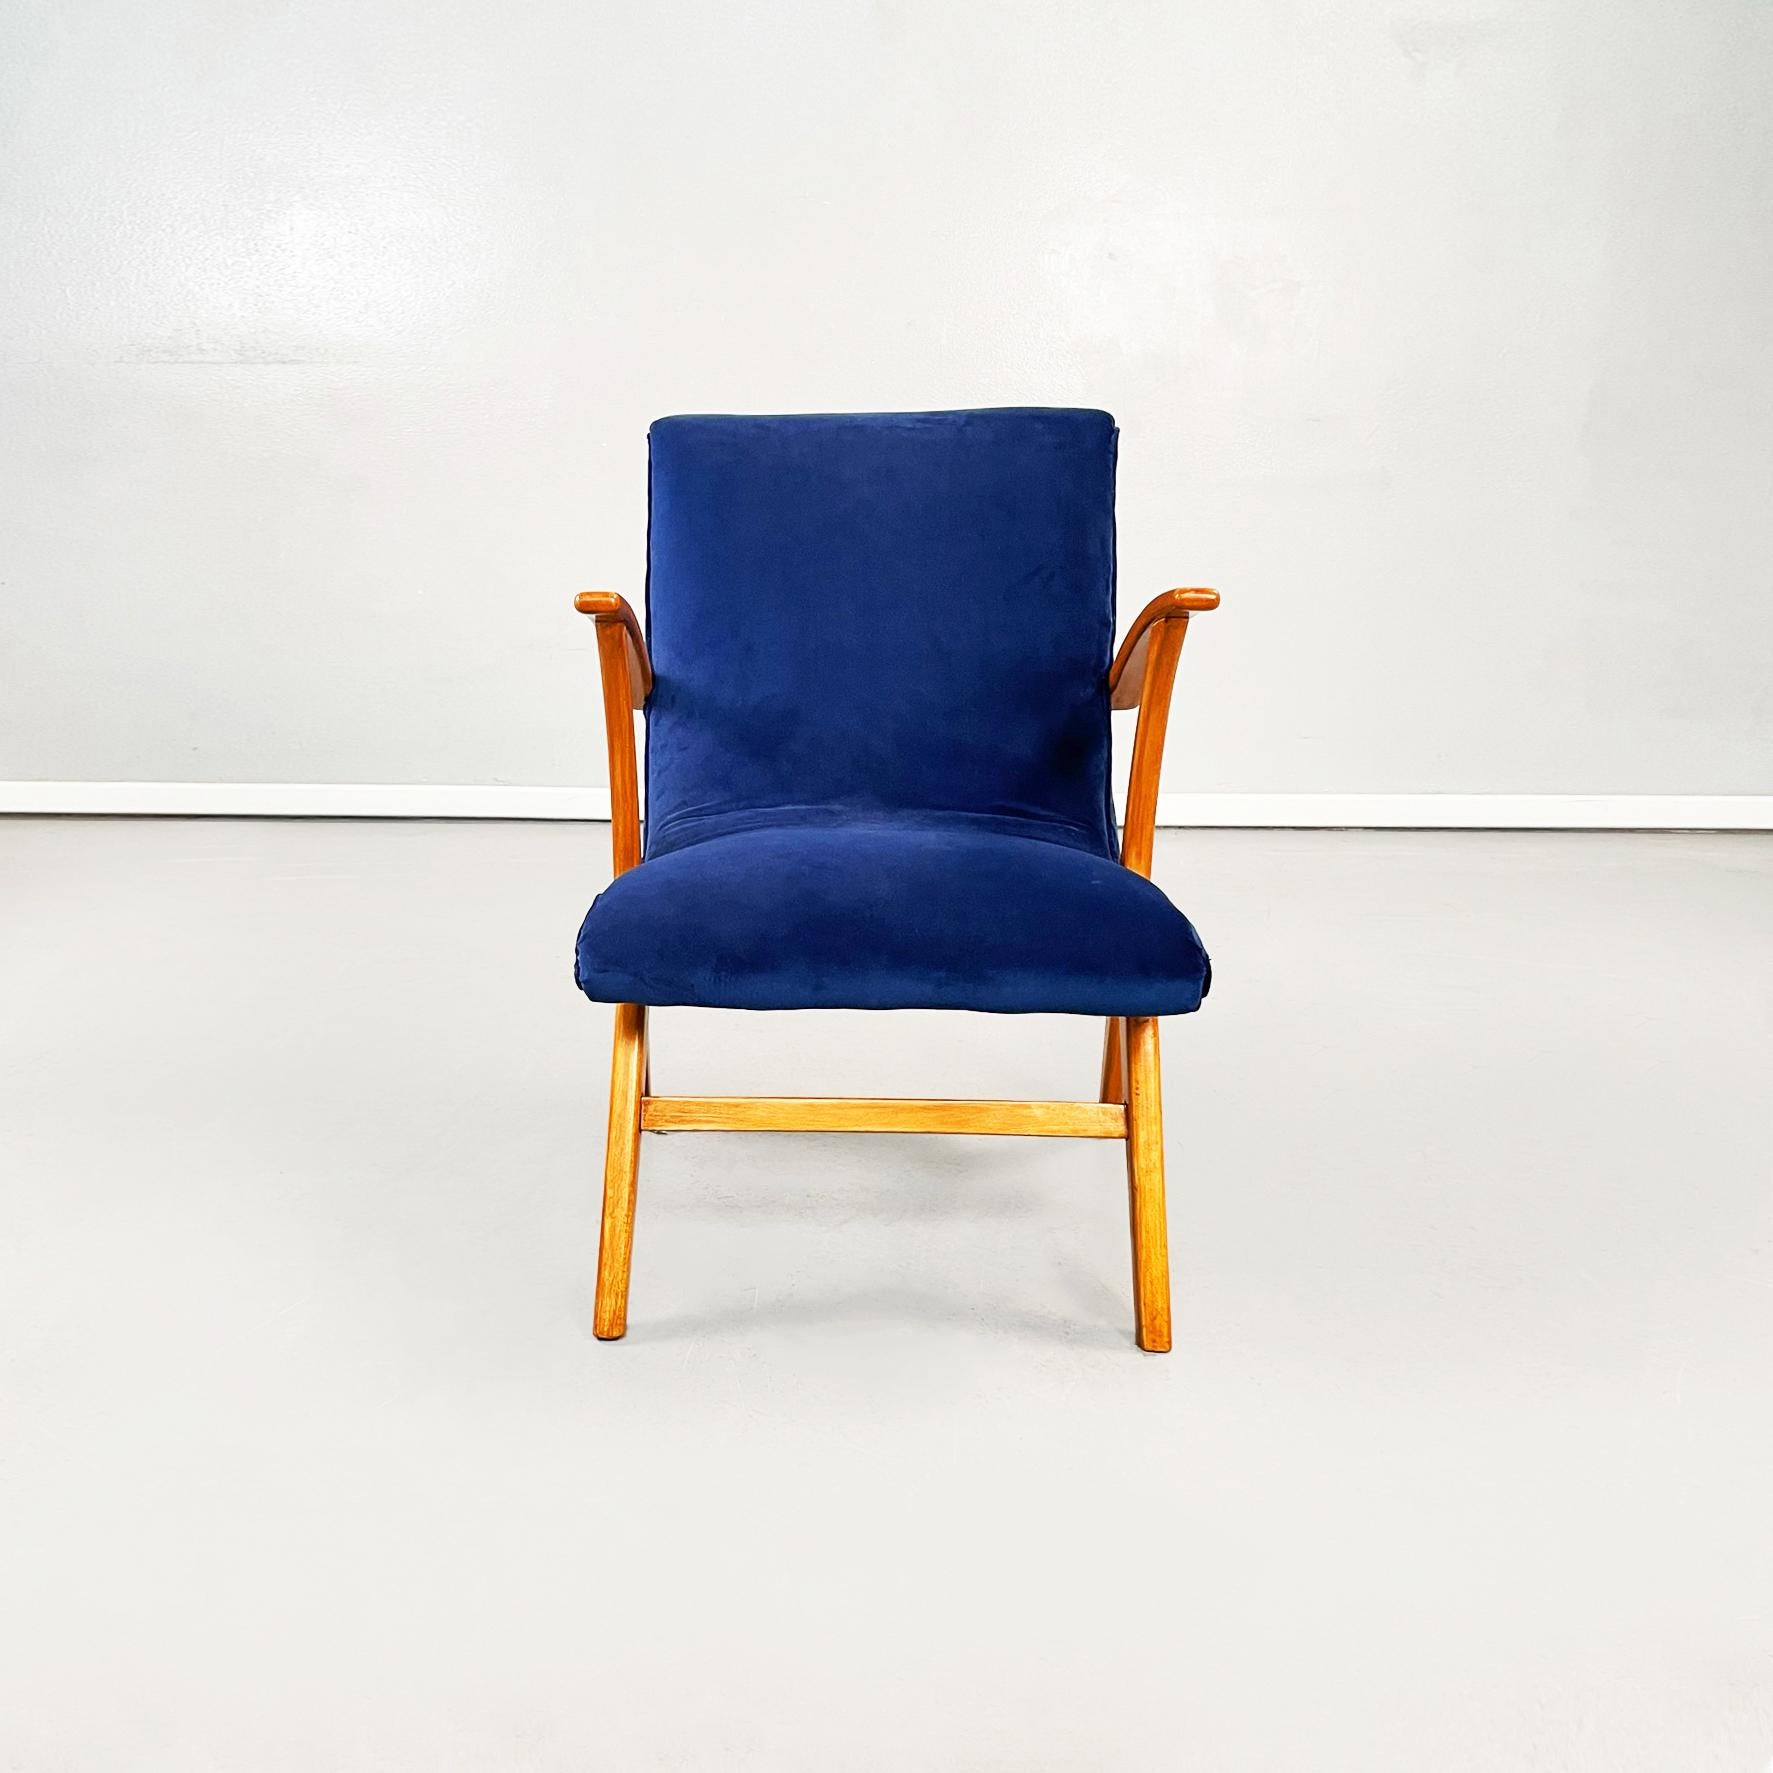 Danish Mid-Century Modern armchair in blue velvet and solid wood, 1960s
2 Armchairs ara available.
Elegant armchair with padded seat and back upholstered in blue velvet. The armrests and the legs are in light solid wood.
From 1960s These